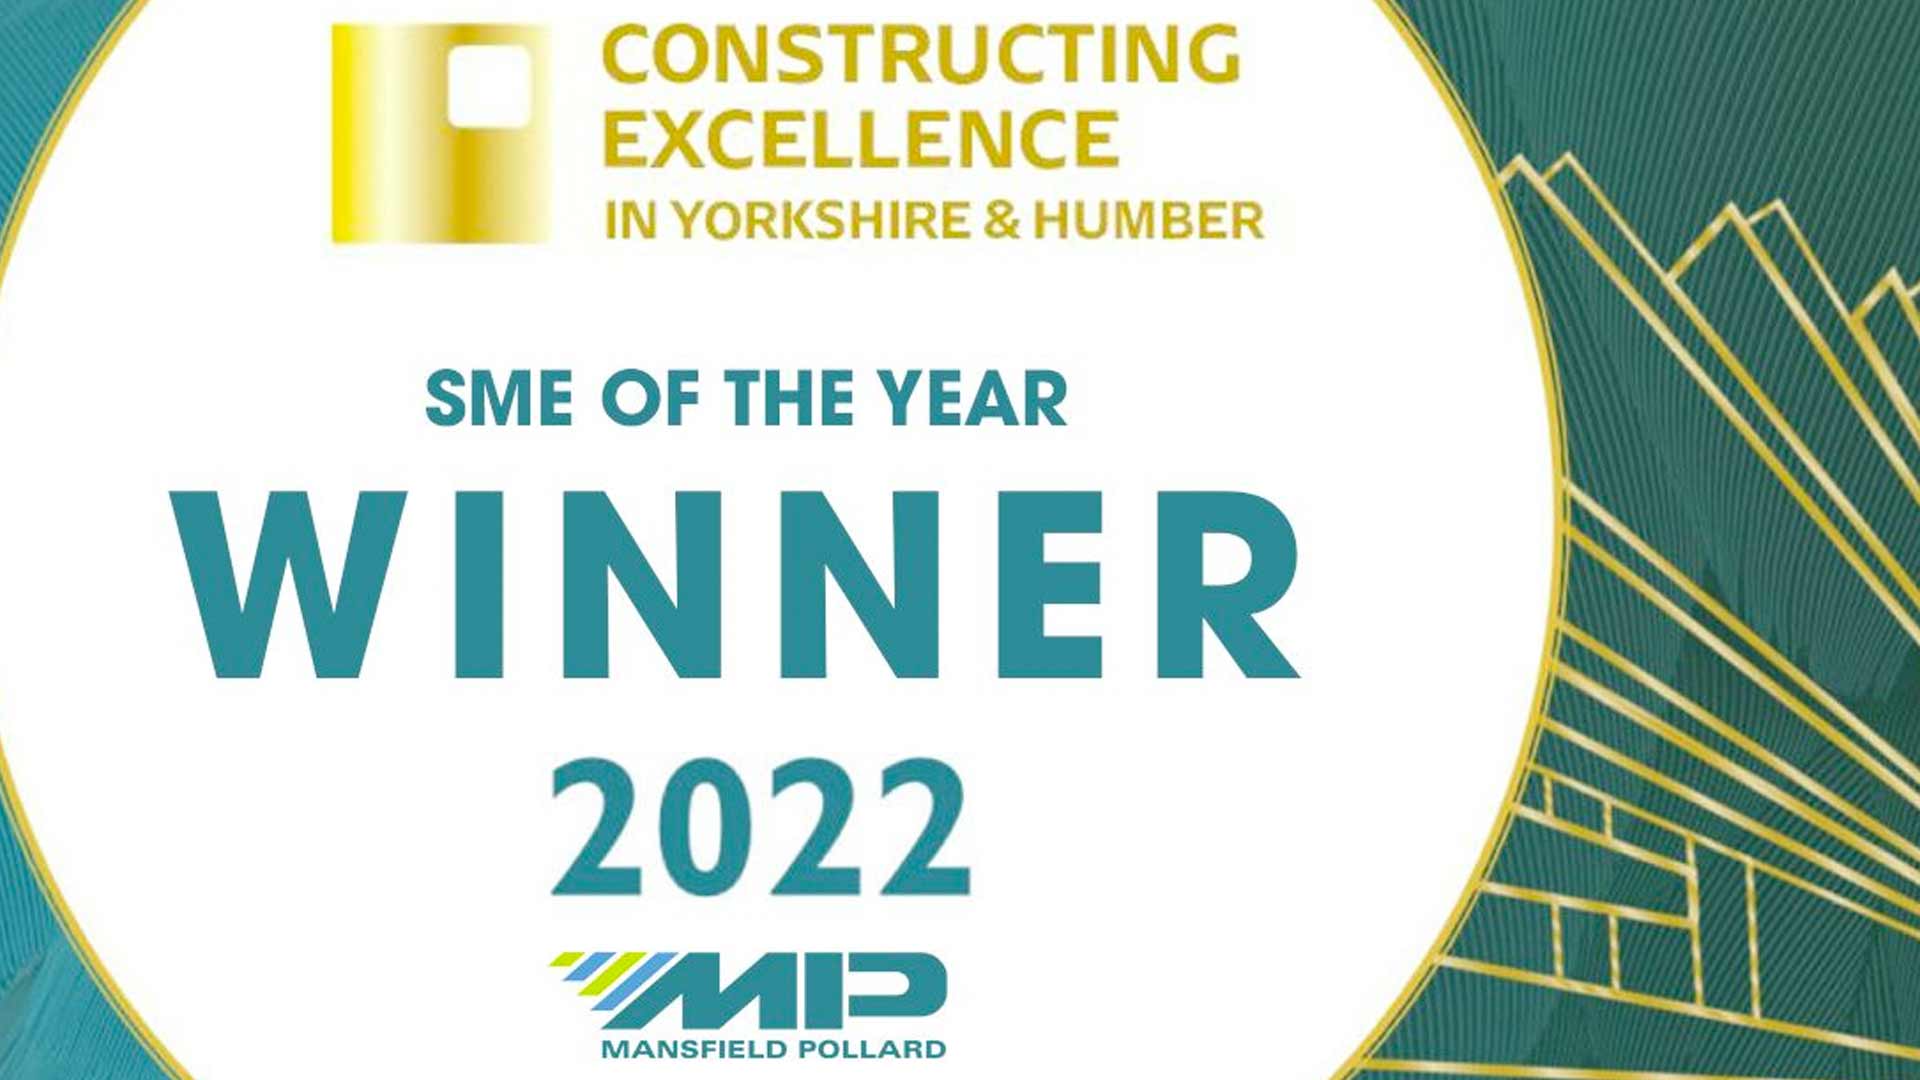 SME-of-the-Year-2022-constructing-excellence